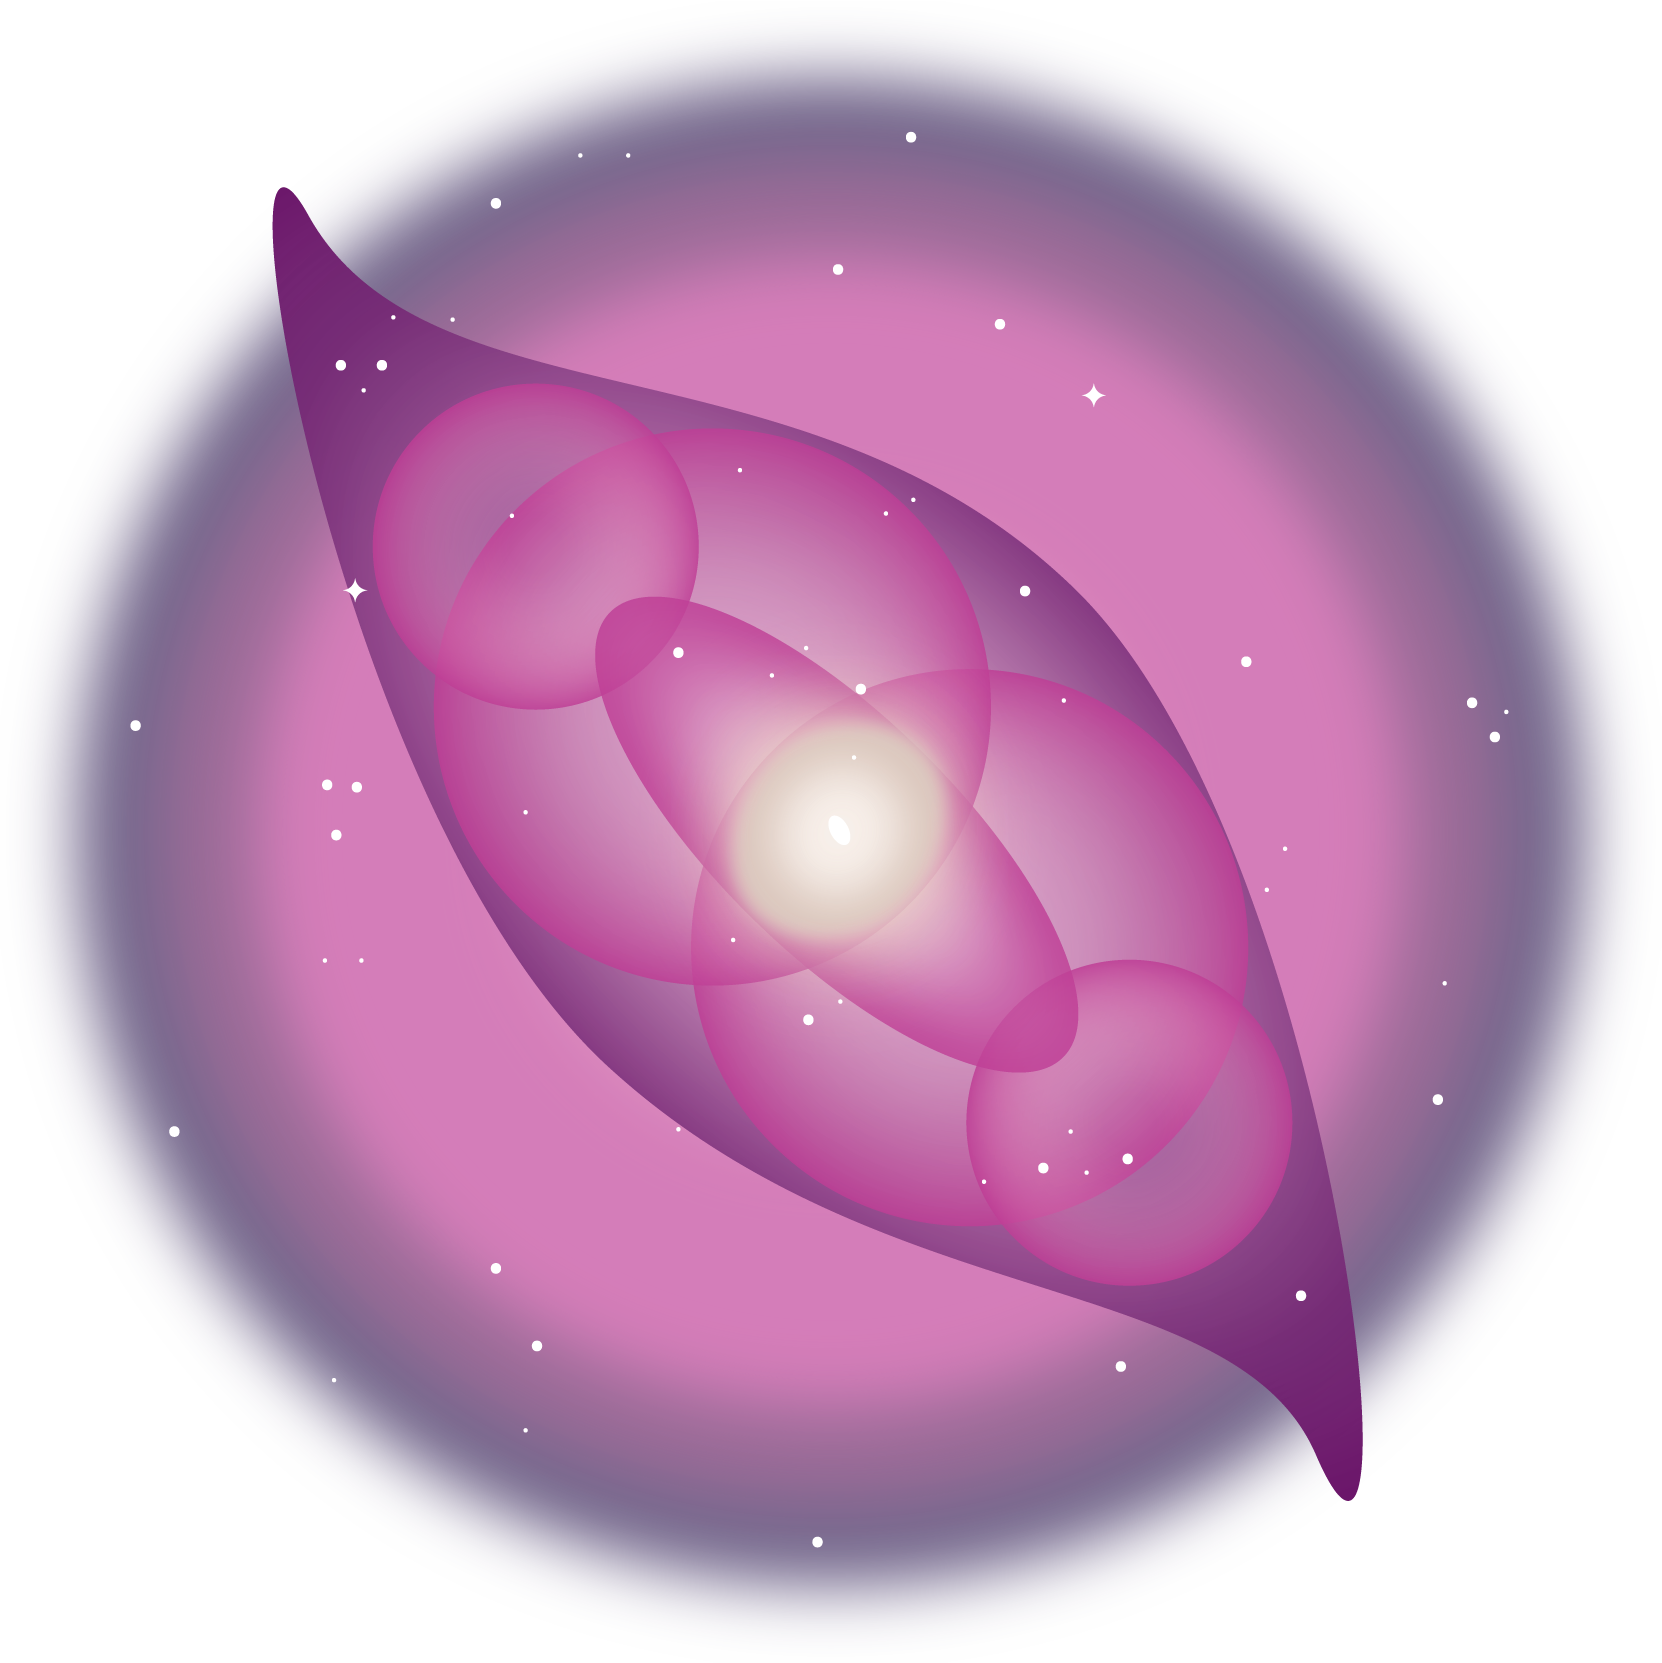 In the background is a hazy pink and purple circle, with dark, transparent dark purple around the edge and lighter/brighter pinks leading inward. In front of the big circle is a purple object, shaped like a minimal, twisty lemon. Inside of this shape is a central, light yellow, cloudy circle with a bright white spot in the middle. All within the lemon-shaped object, the white spot is surrounded by a pink oblong oval shape which is overlapped by two large, pink circular shapes and two small, pink circular shapes. White dots representing stars speckle the image.